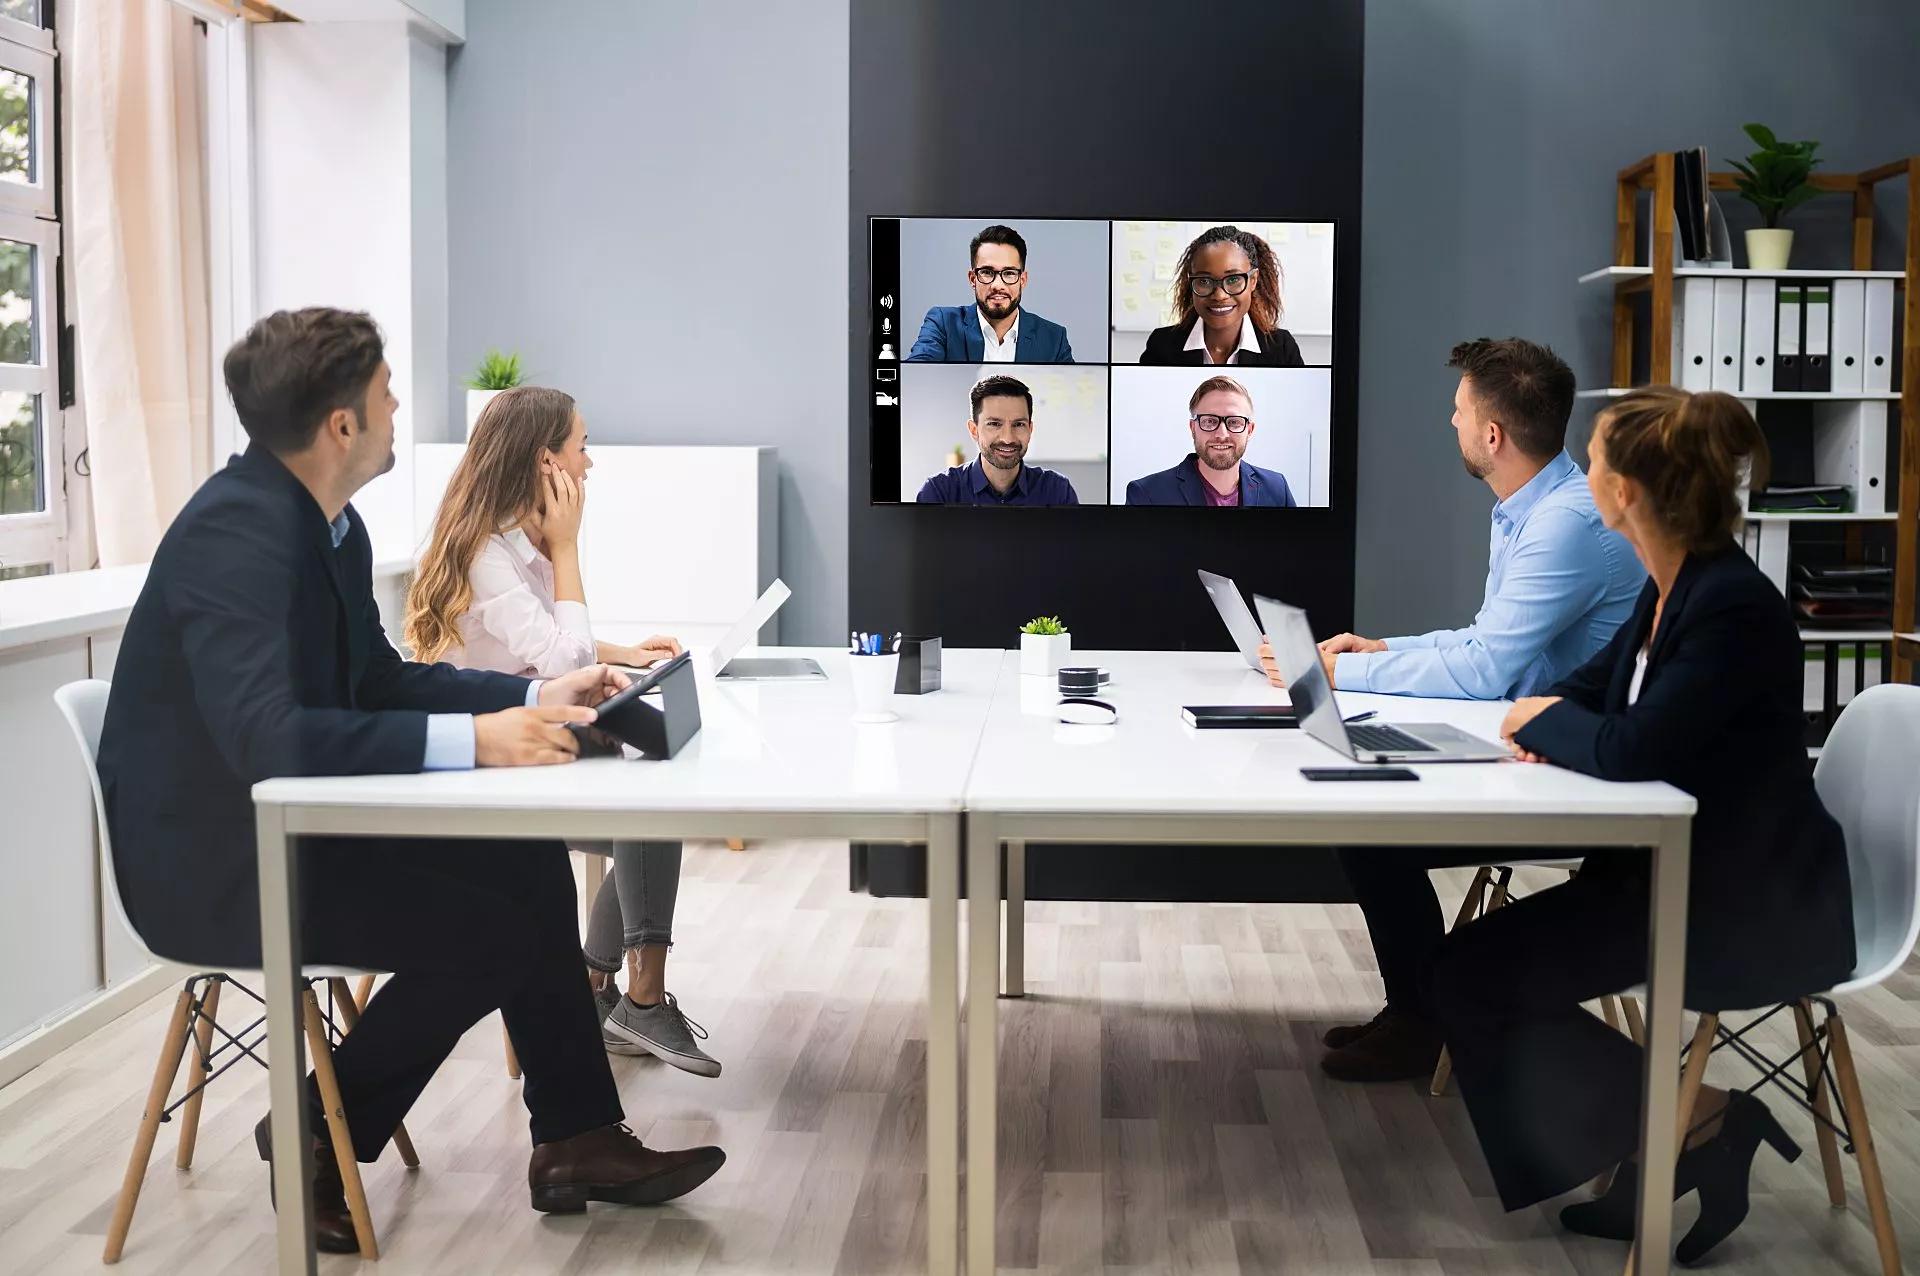 Four colleagues sit at a rectangular conference table, and speak to four colleagues over video.